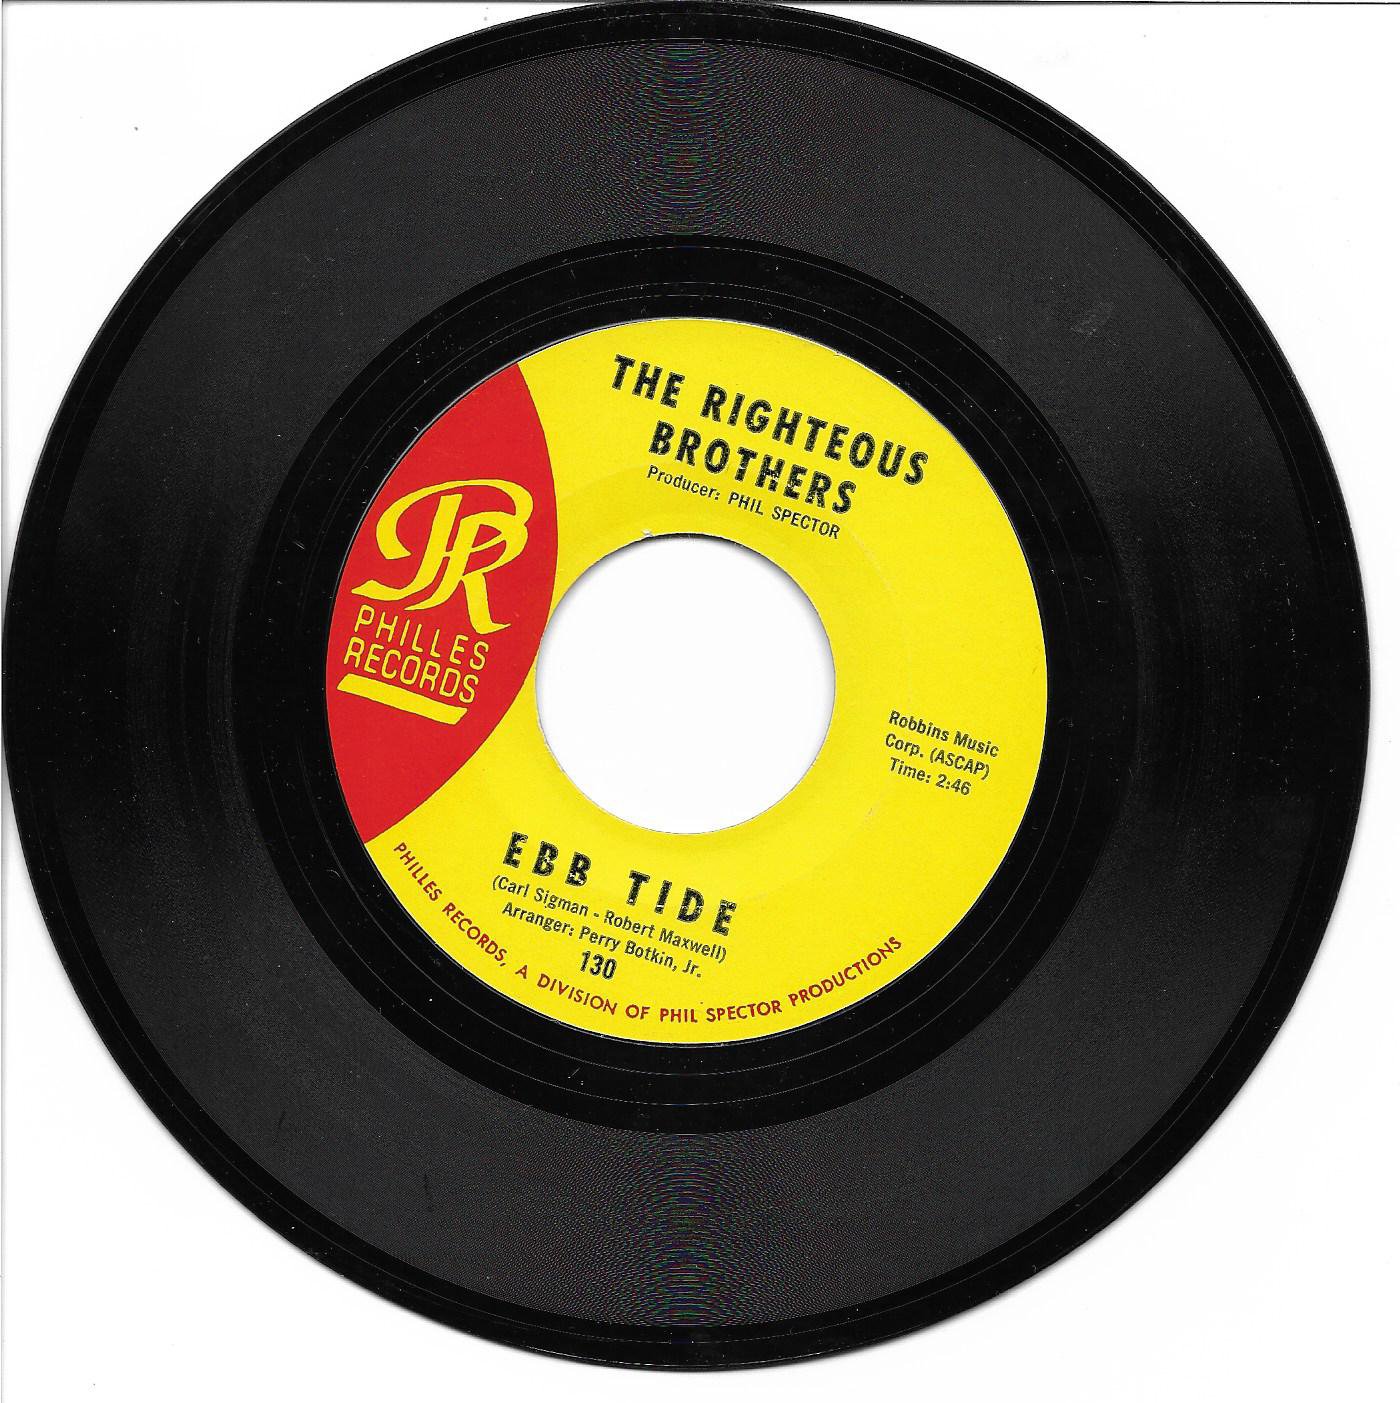 Righteous Brothers: "Ebb Tide" / "For Sentimental Reasons" - '65 hit - Nr Mint!